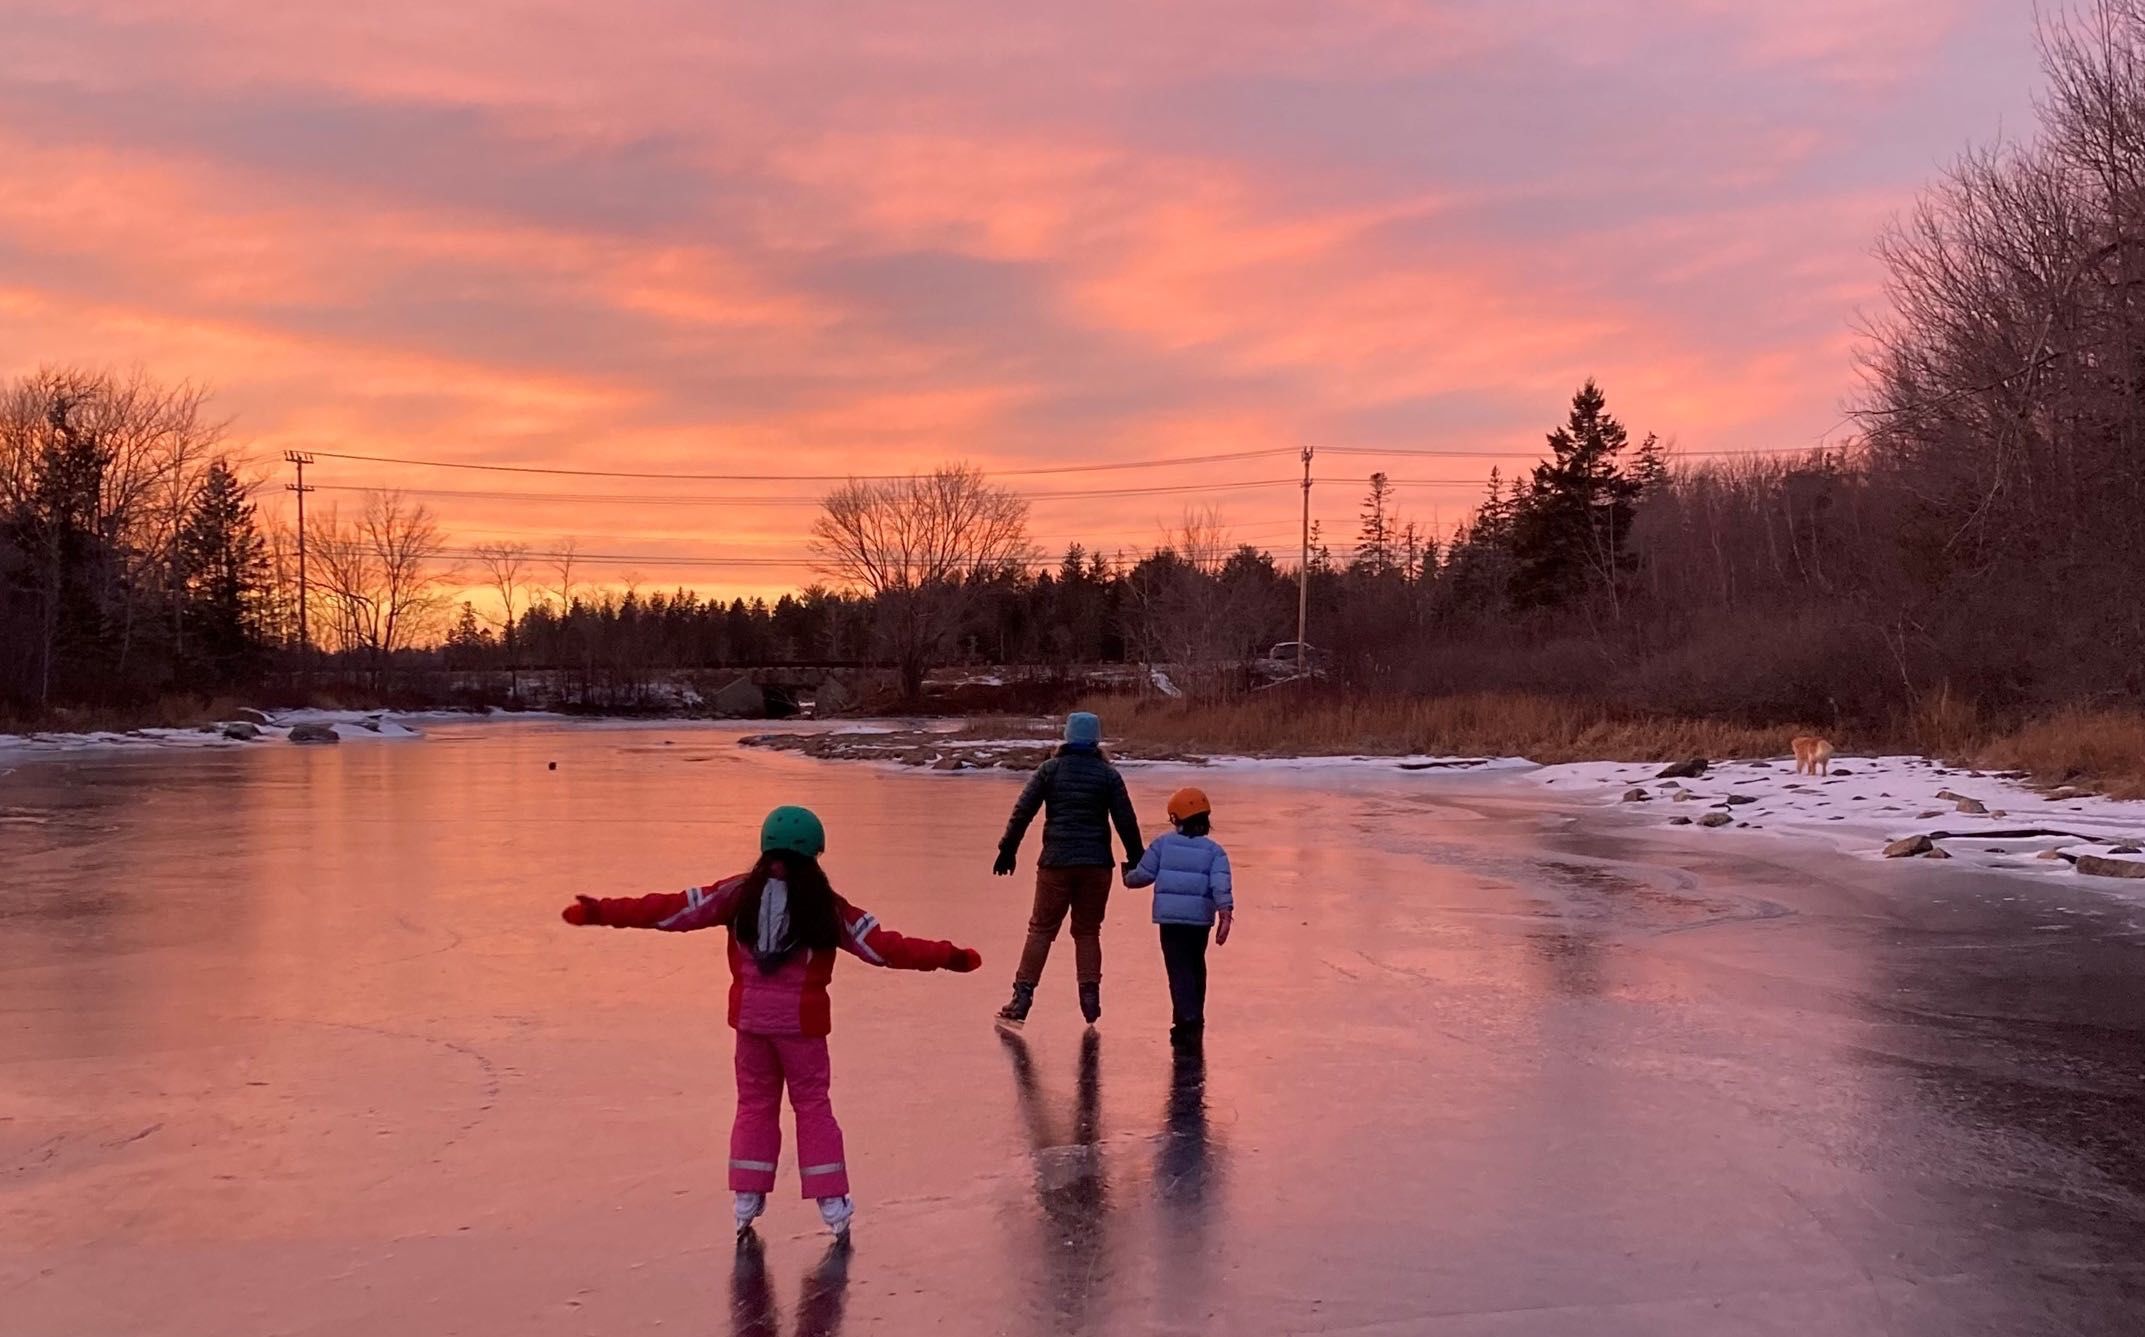 pink sunset and skaters on ice